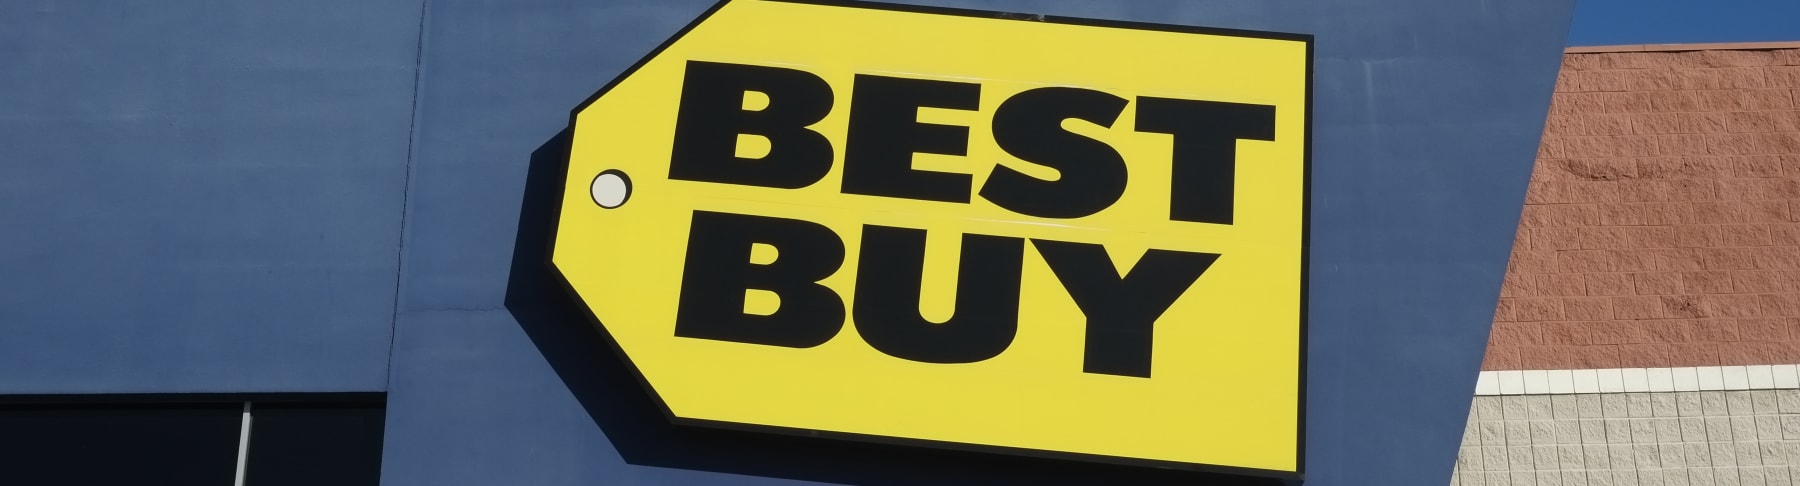 Yellow Best Buy sign on store exterior.